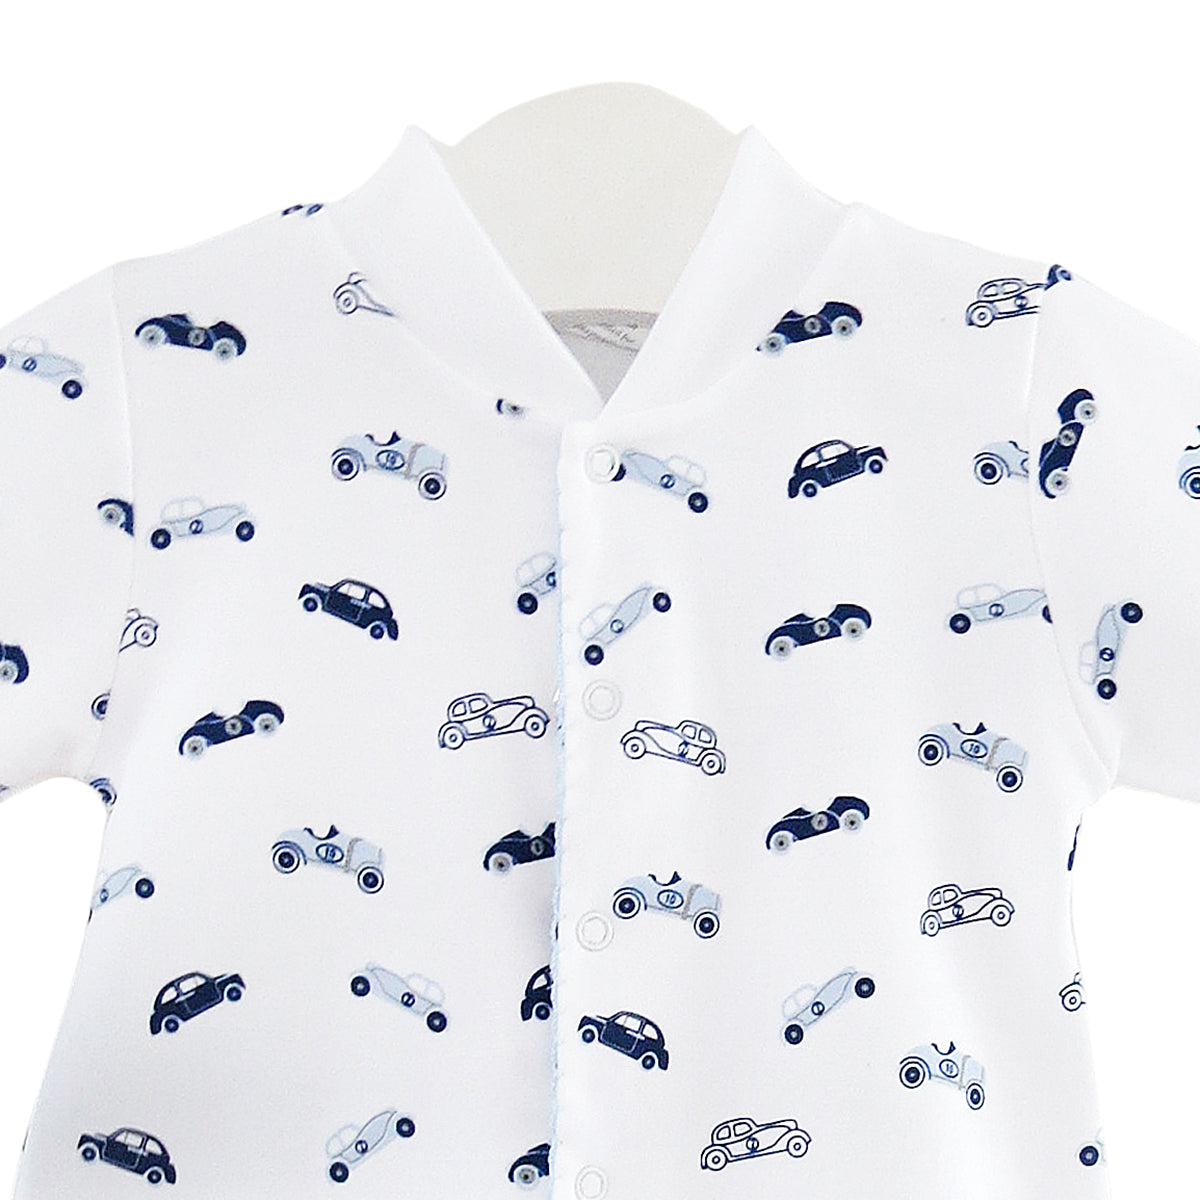 White Pima Cotton Footie for Baby Boy with Vintage Cars Print - zoomed in